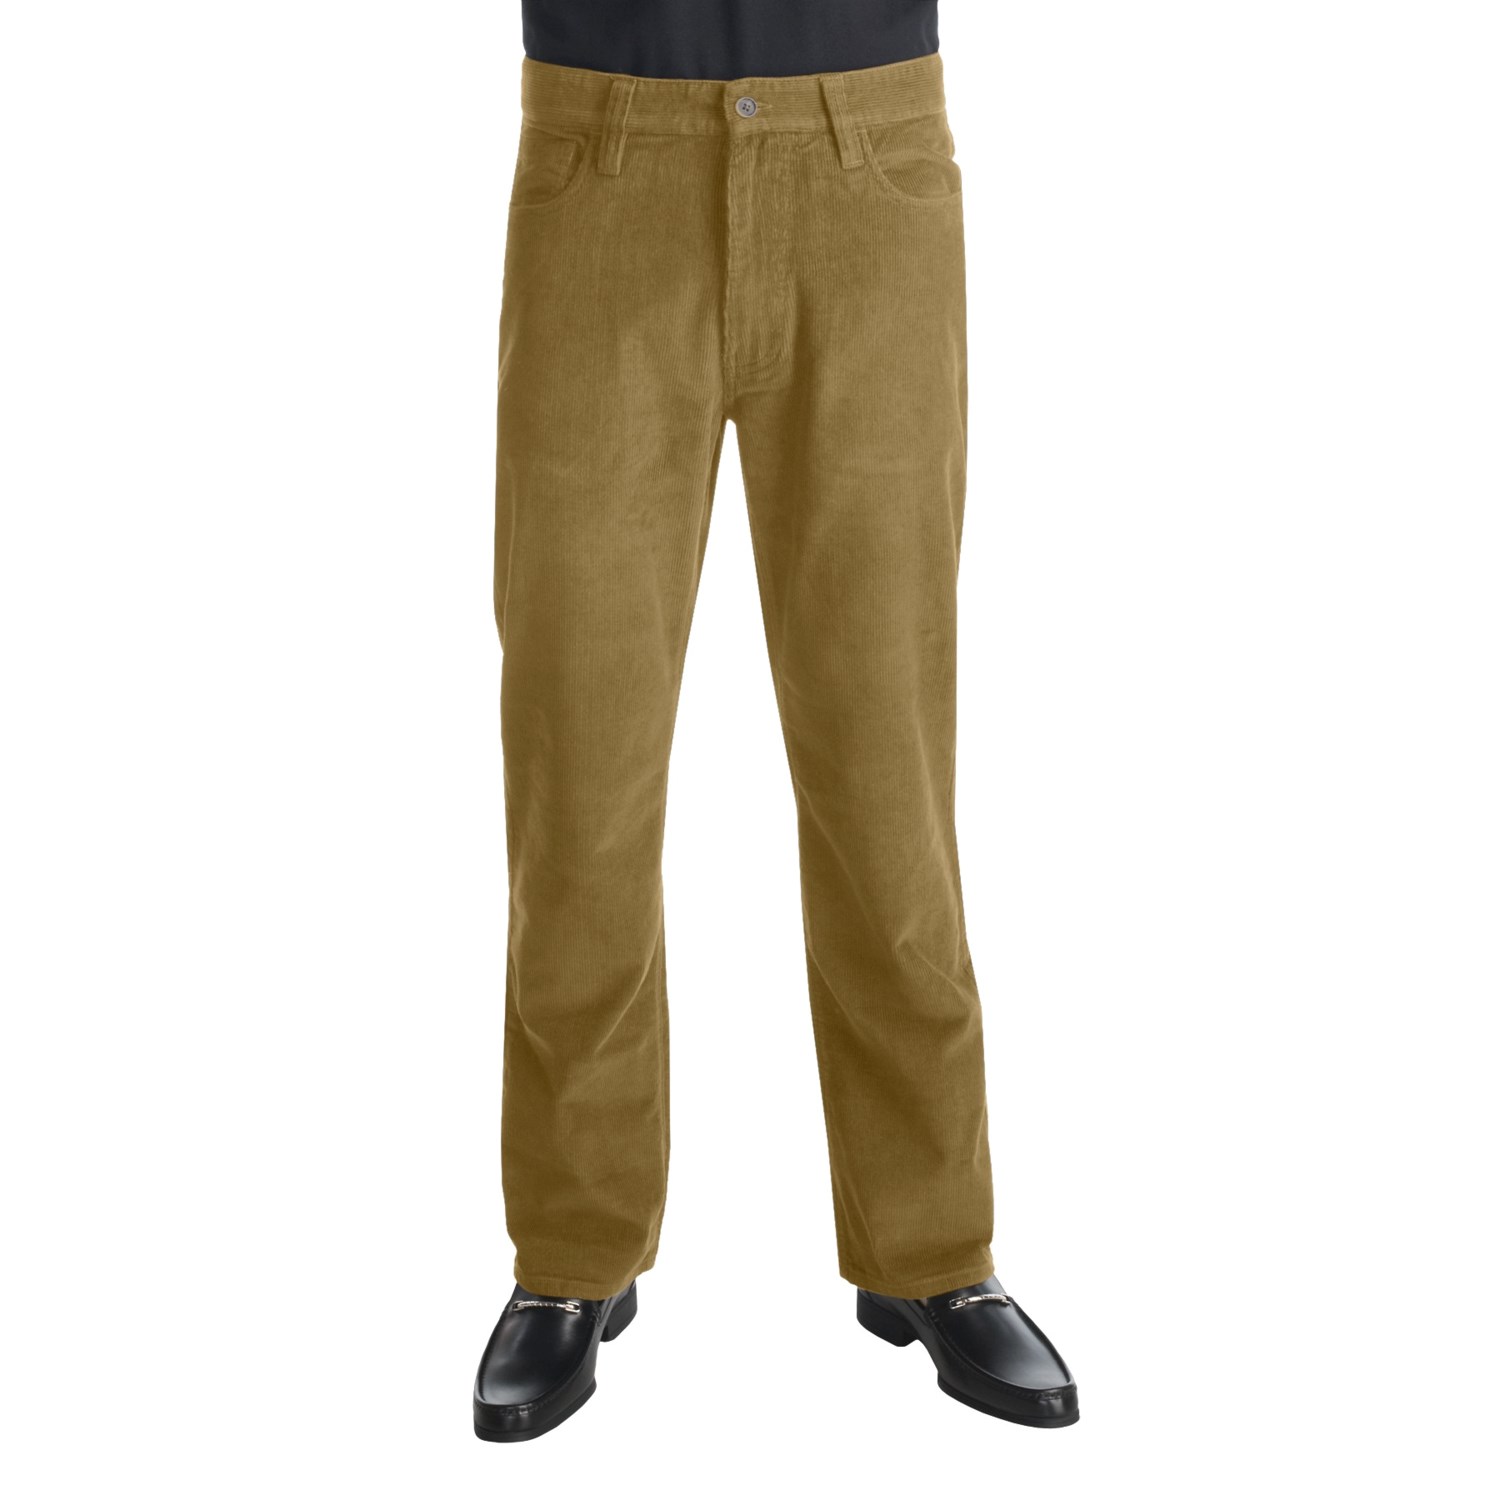 I want corduroy pants and maybe a velour shirt | IGN Boards